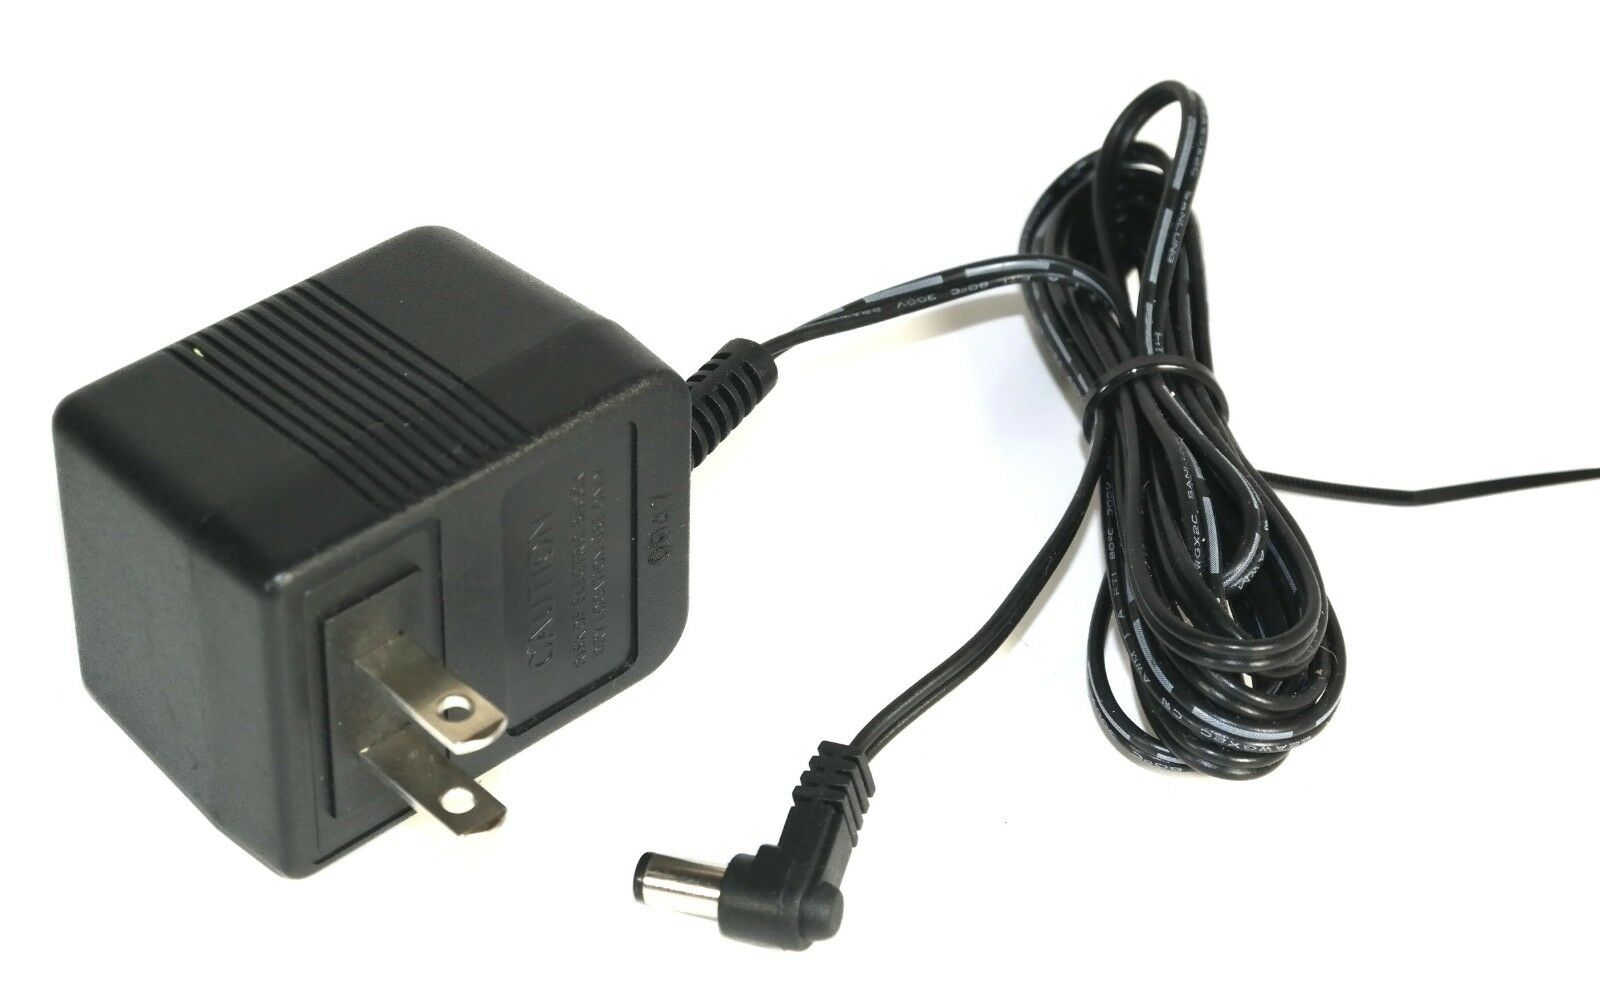 NEW 9V 300mA AD35-0904 AC Power Supply Adapter Charger